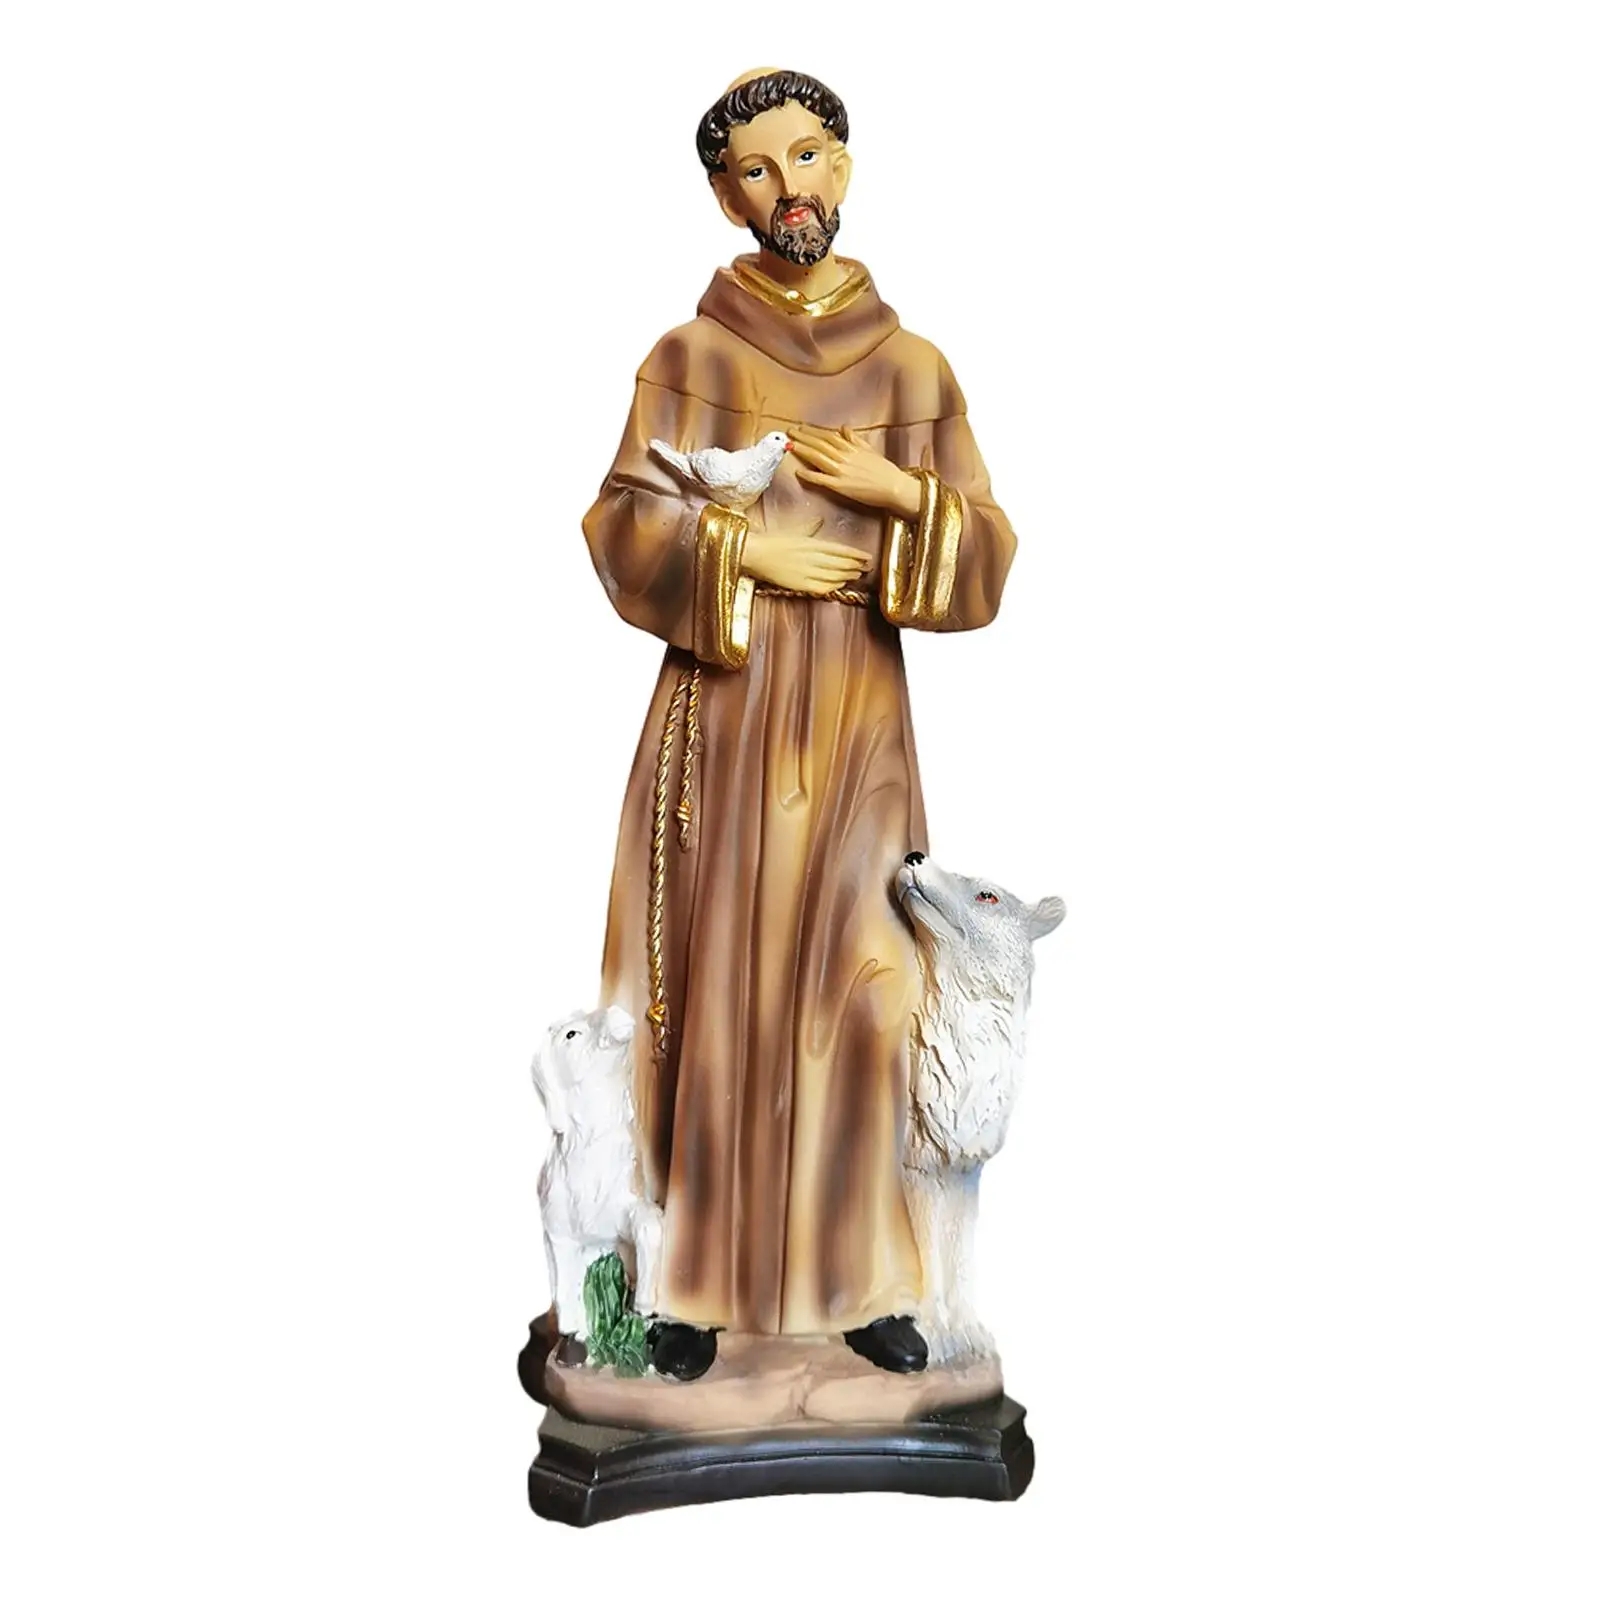 Collectible Figurine Character Sculptures Ornament Religious Figurine Religious Figure Statue for Bar Outdoor Cabinet Yard